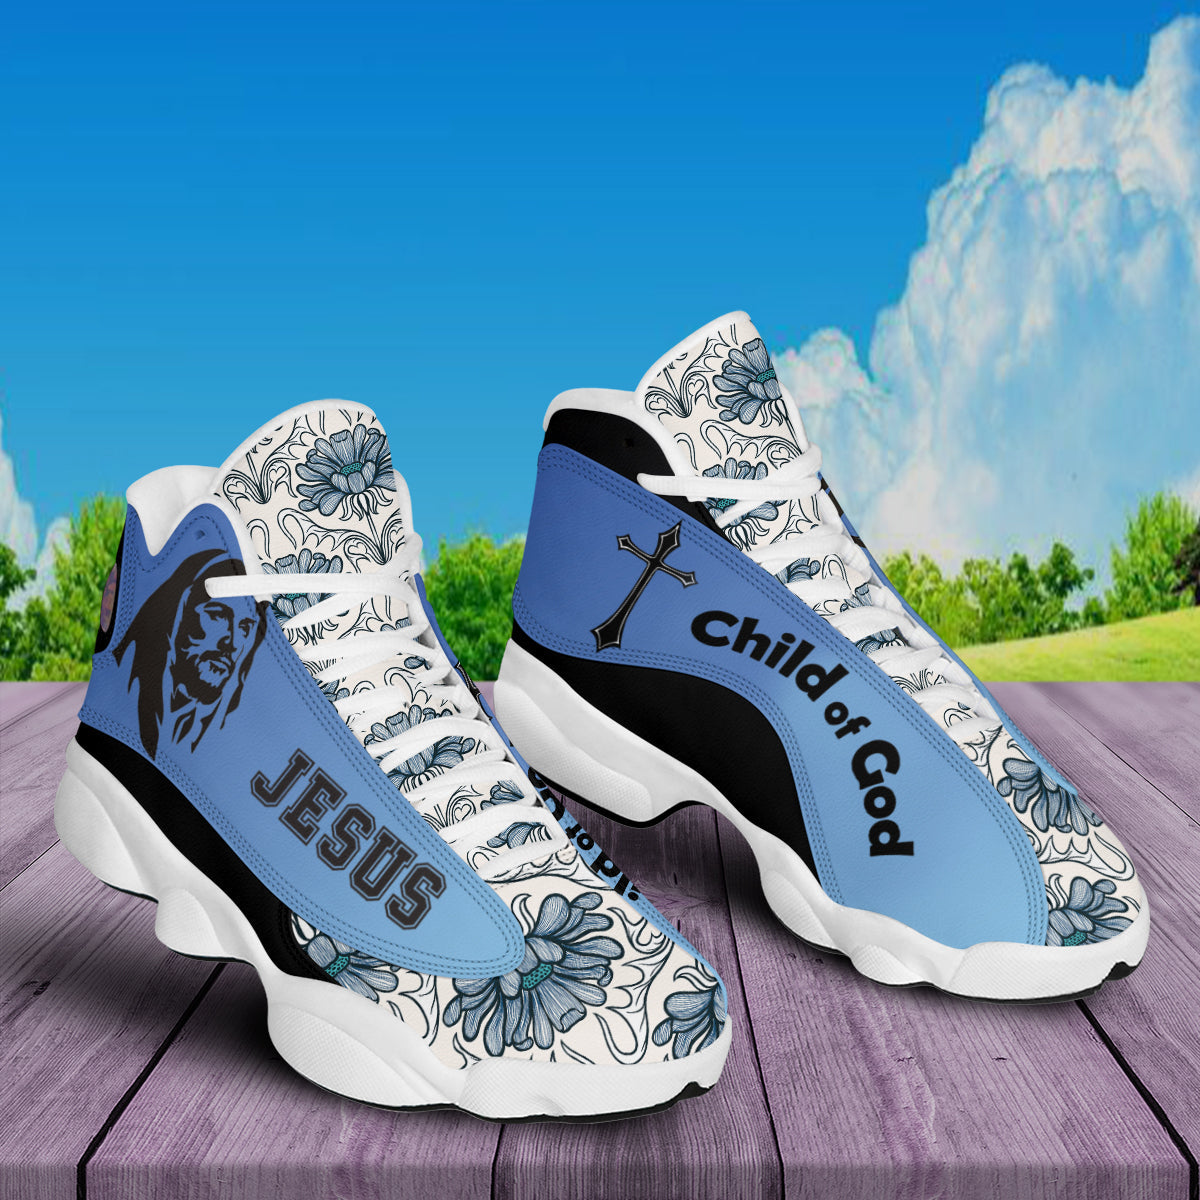 Teesdily | Jesus Child Of God Basketball Shoes, God Floral Pattern Shoes, Gift For Jesus Lovers, Running Shoes, Christian Footwear Gifts Unisex Basketball Shoes With Thick Soles